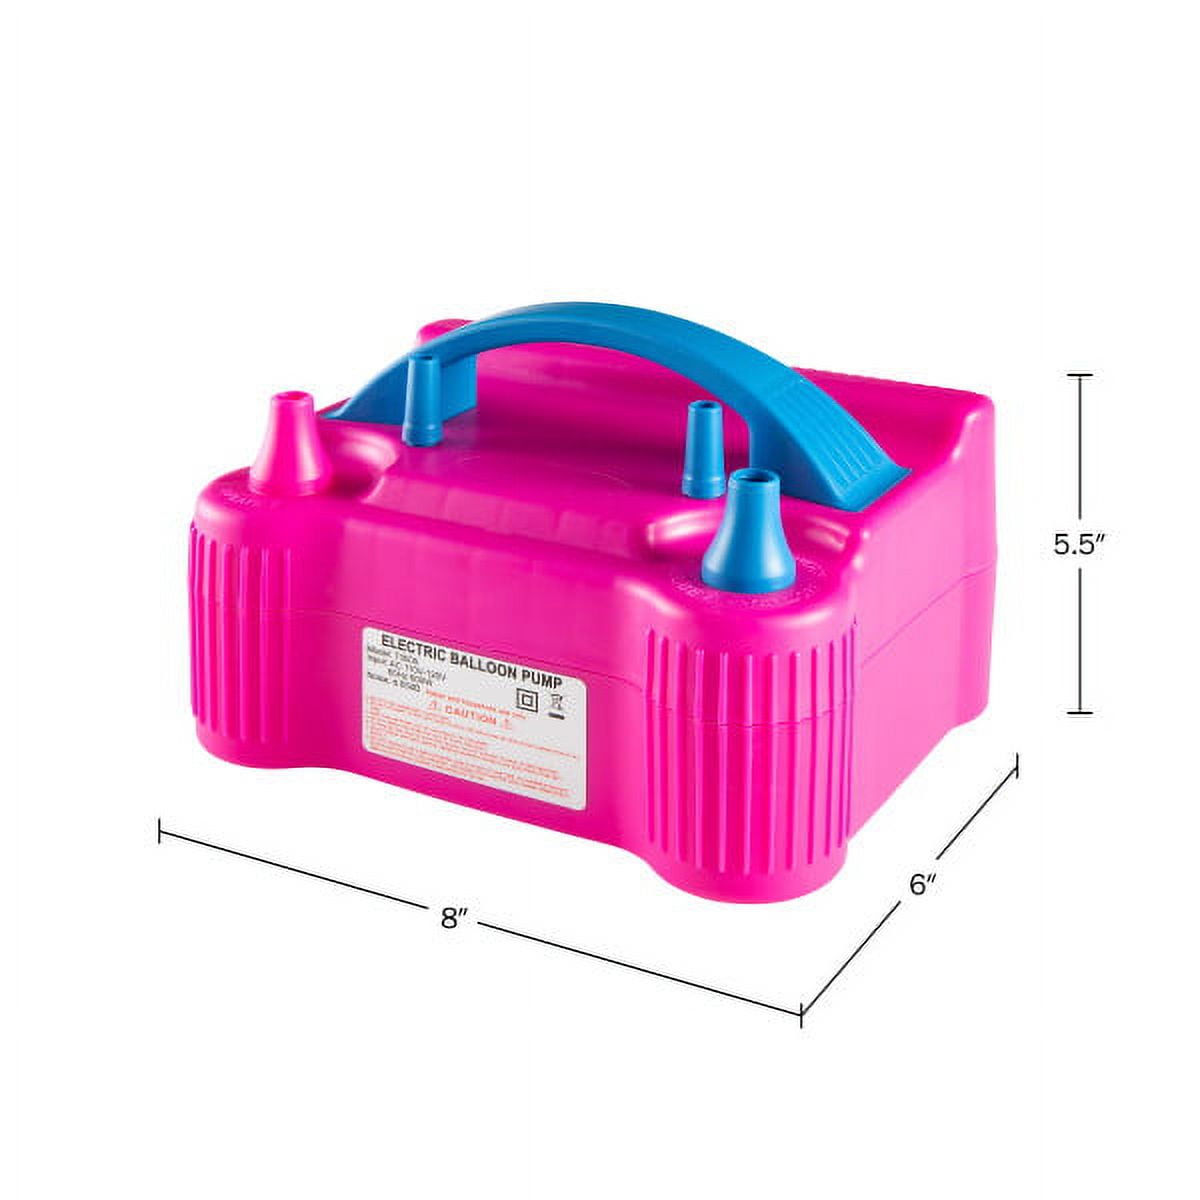 RUBFAC Electric Balloon Pump, Pink Portable Balloon Blower Machine 110-120V  Air Balloon Inflator with Knotters Balloon Strips Point Tapes for Balloon